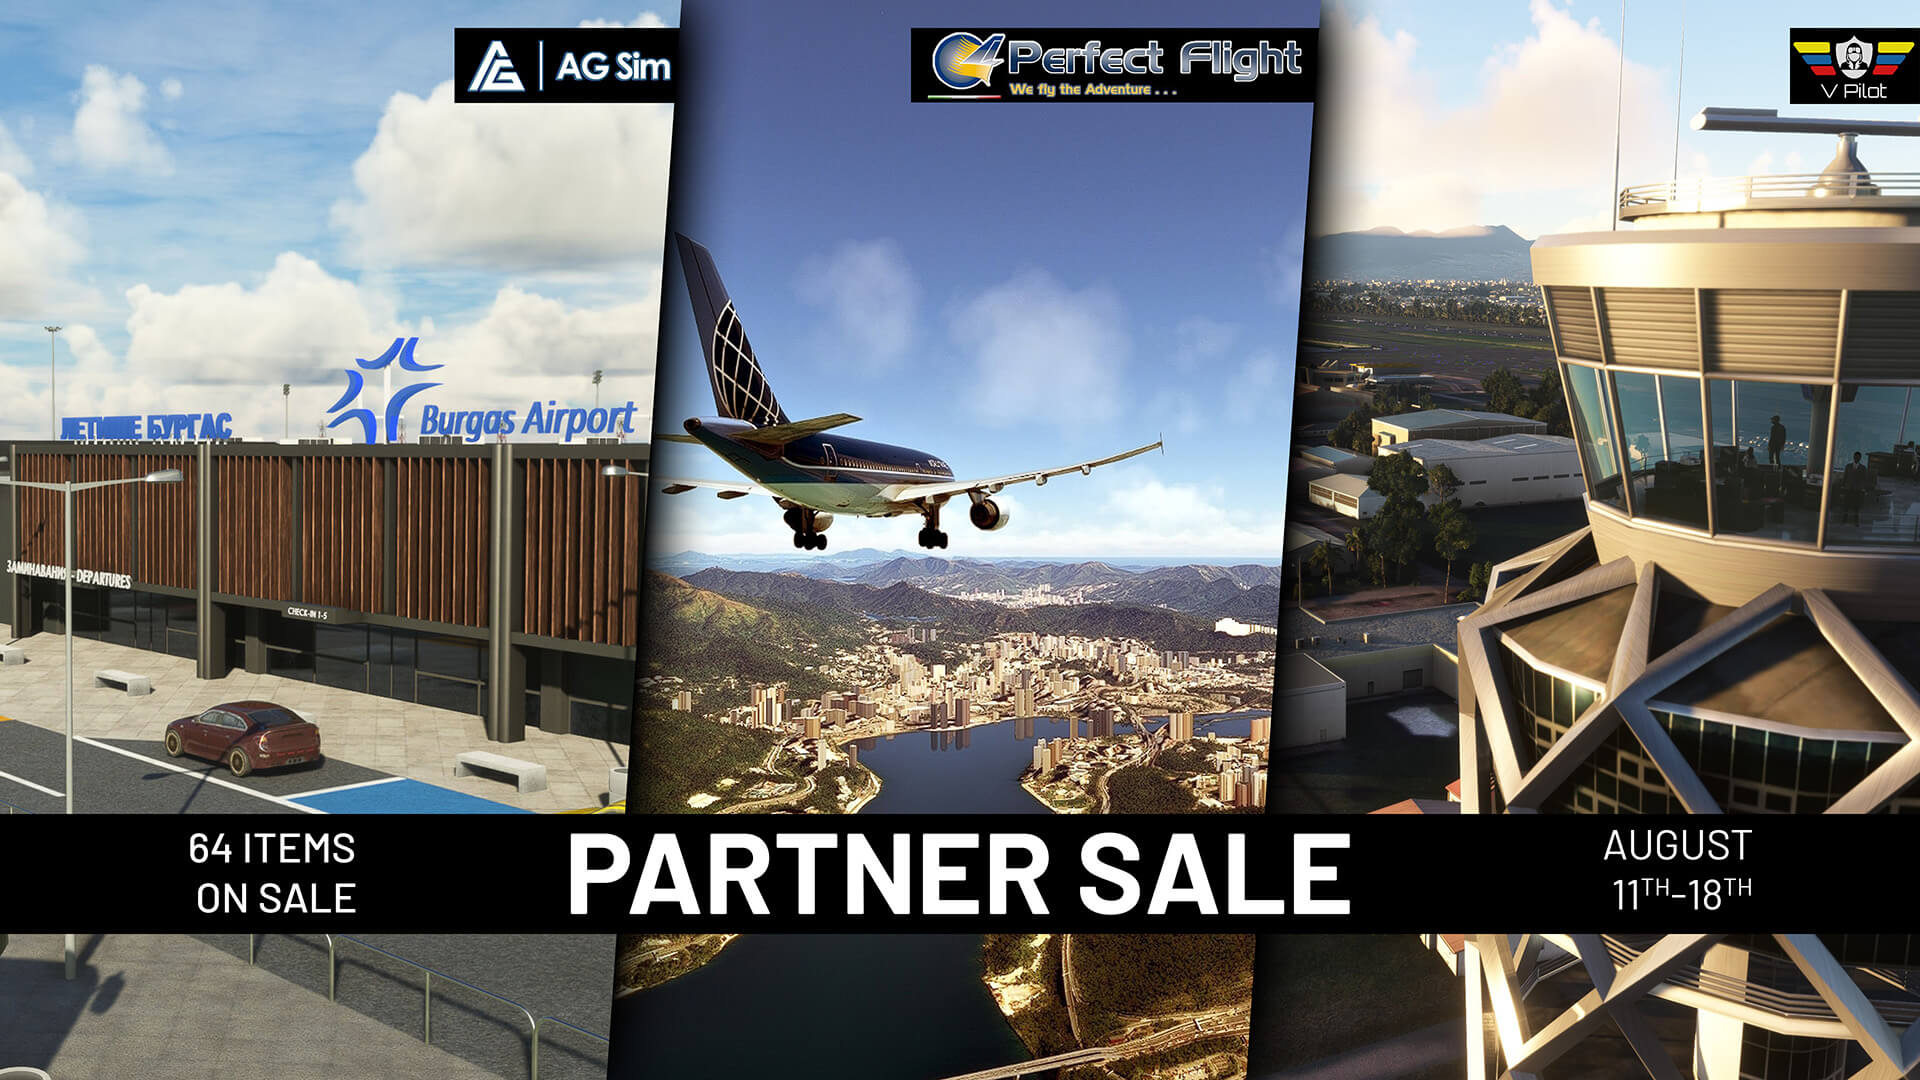 Partner sale: AG Sim, Perfect Flight and V Pilot Designs. 64 items on sale, rules from August 11th to 18th.